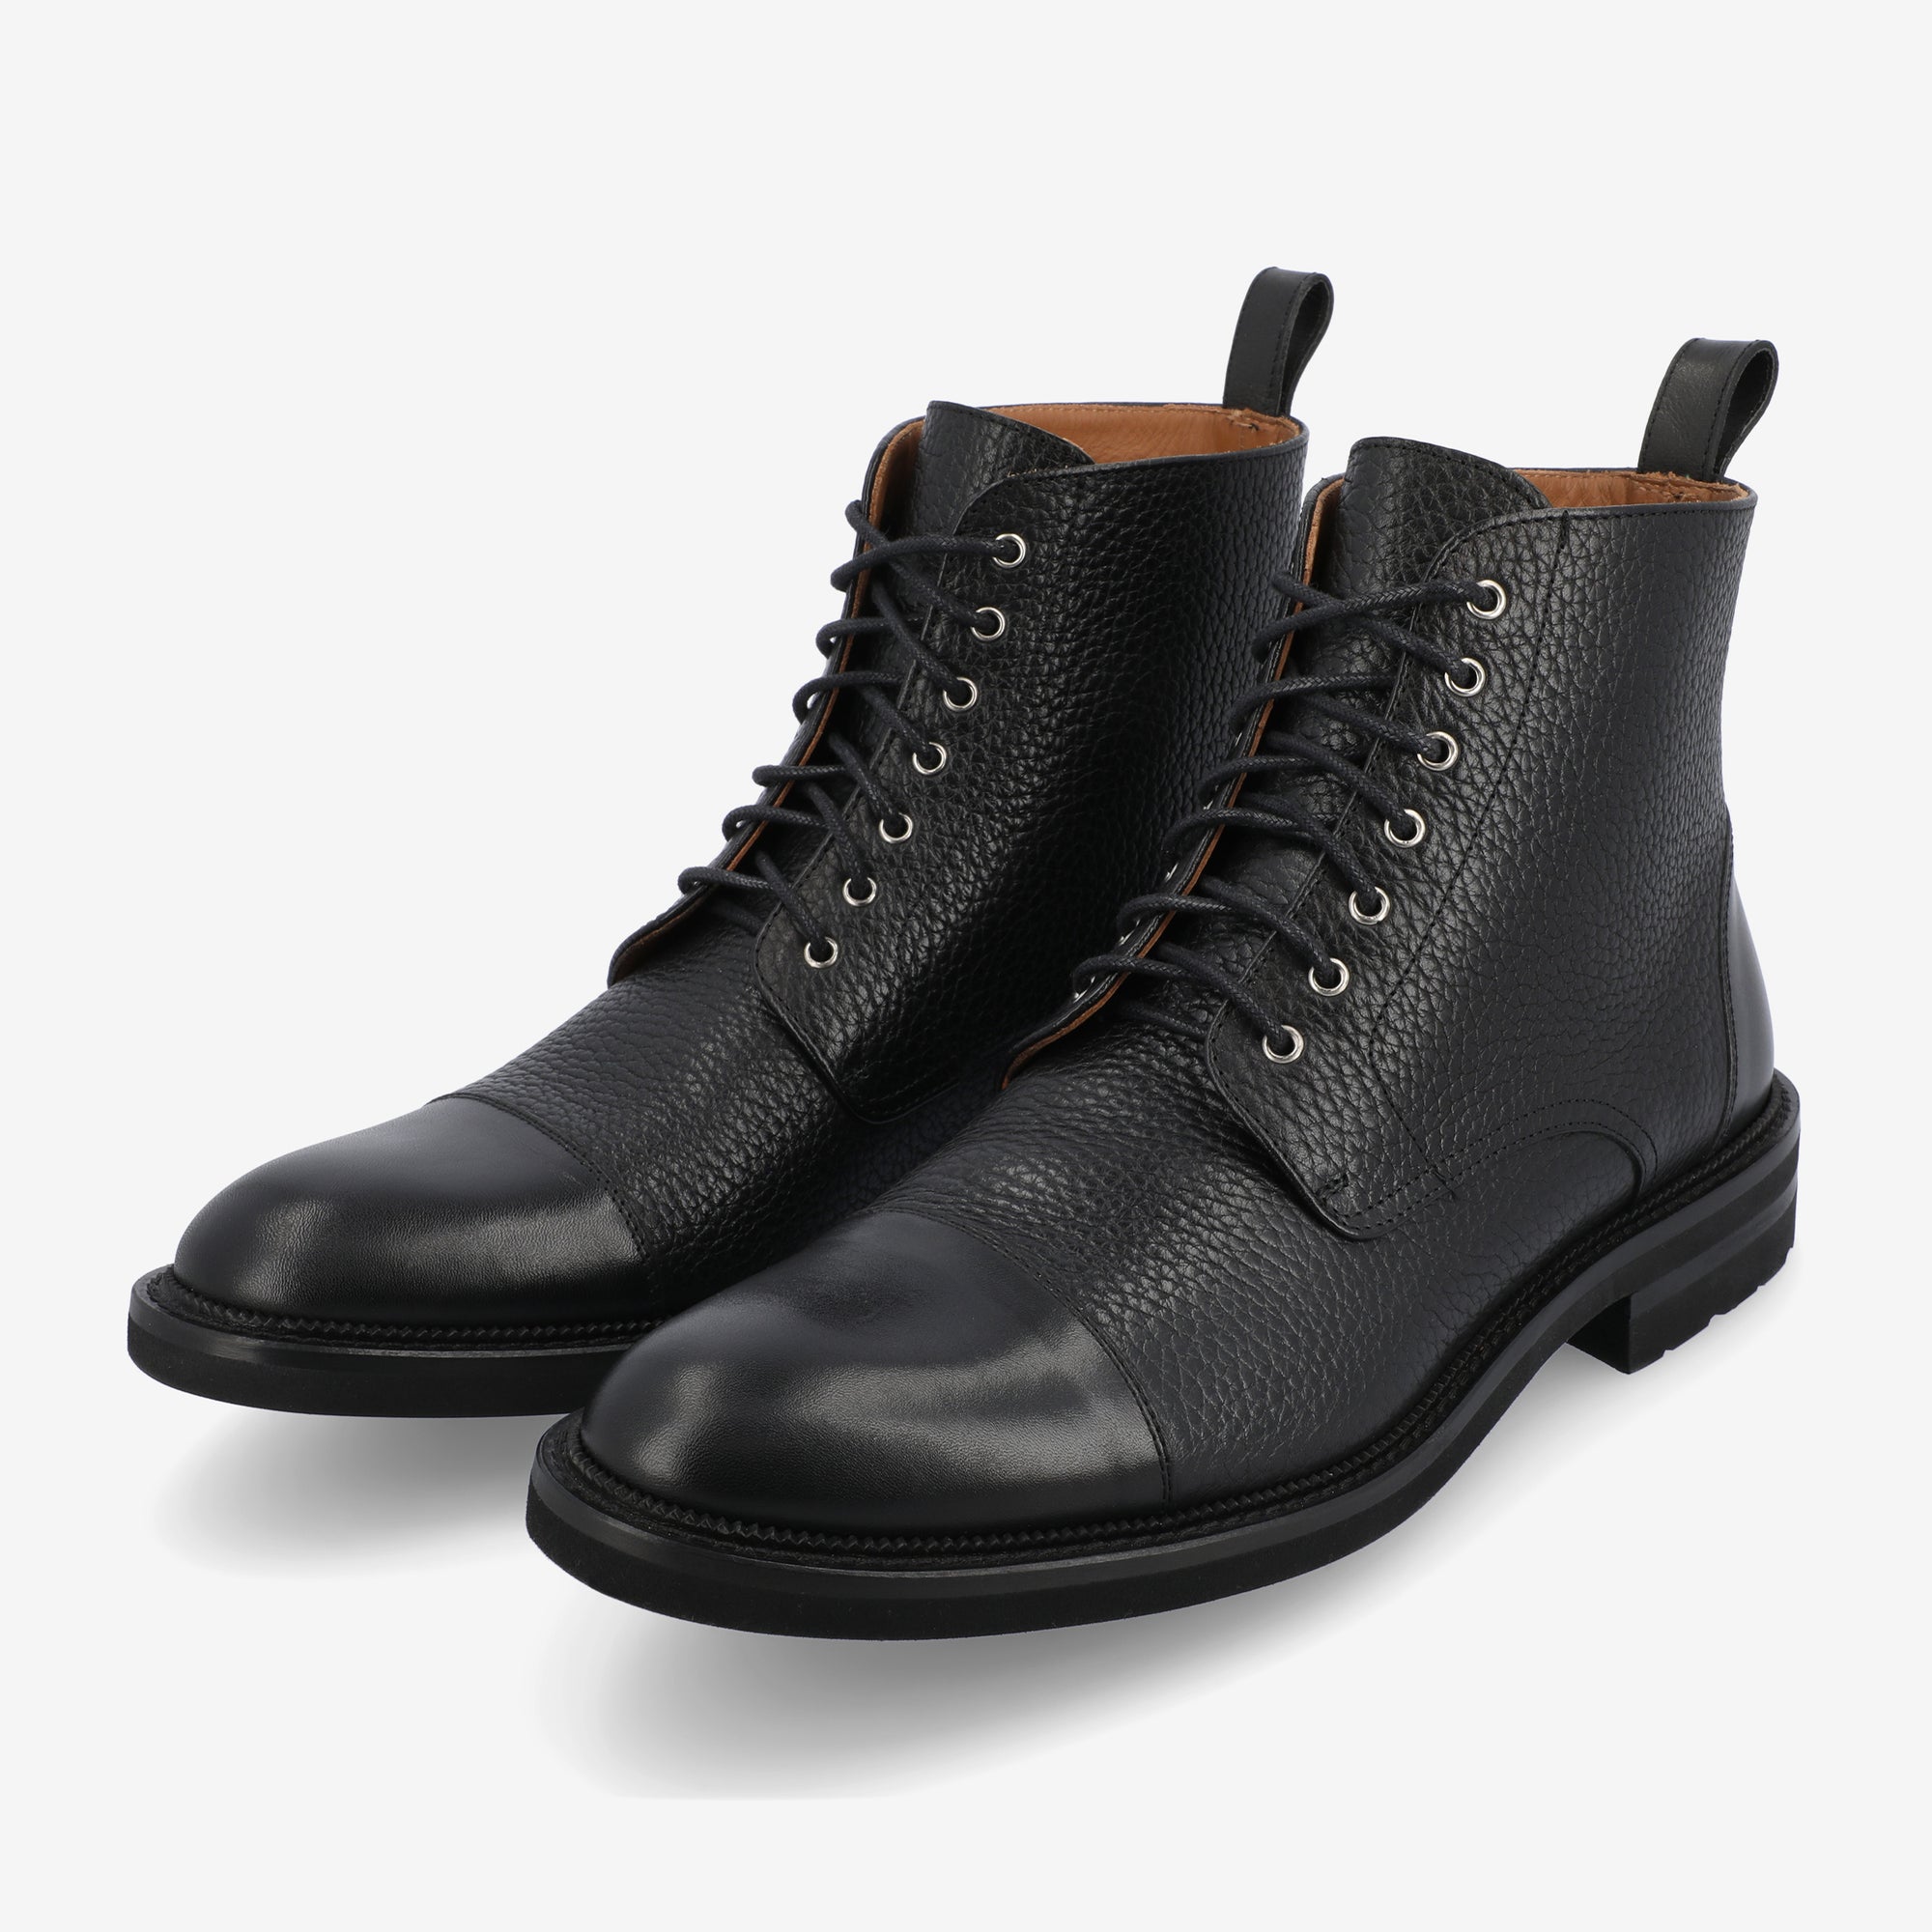 The Rome Boot in Black